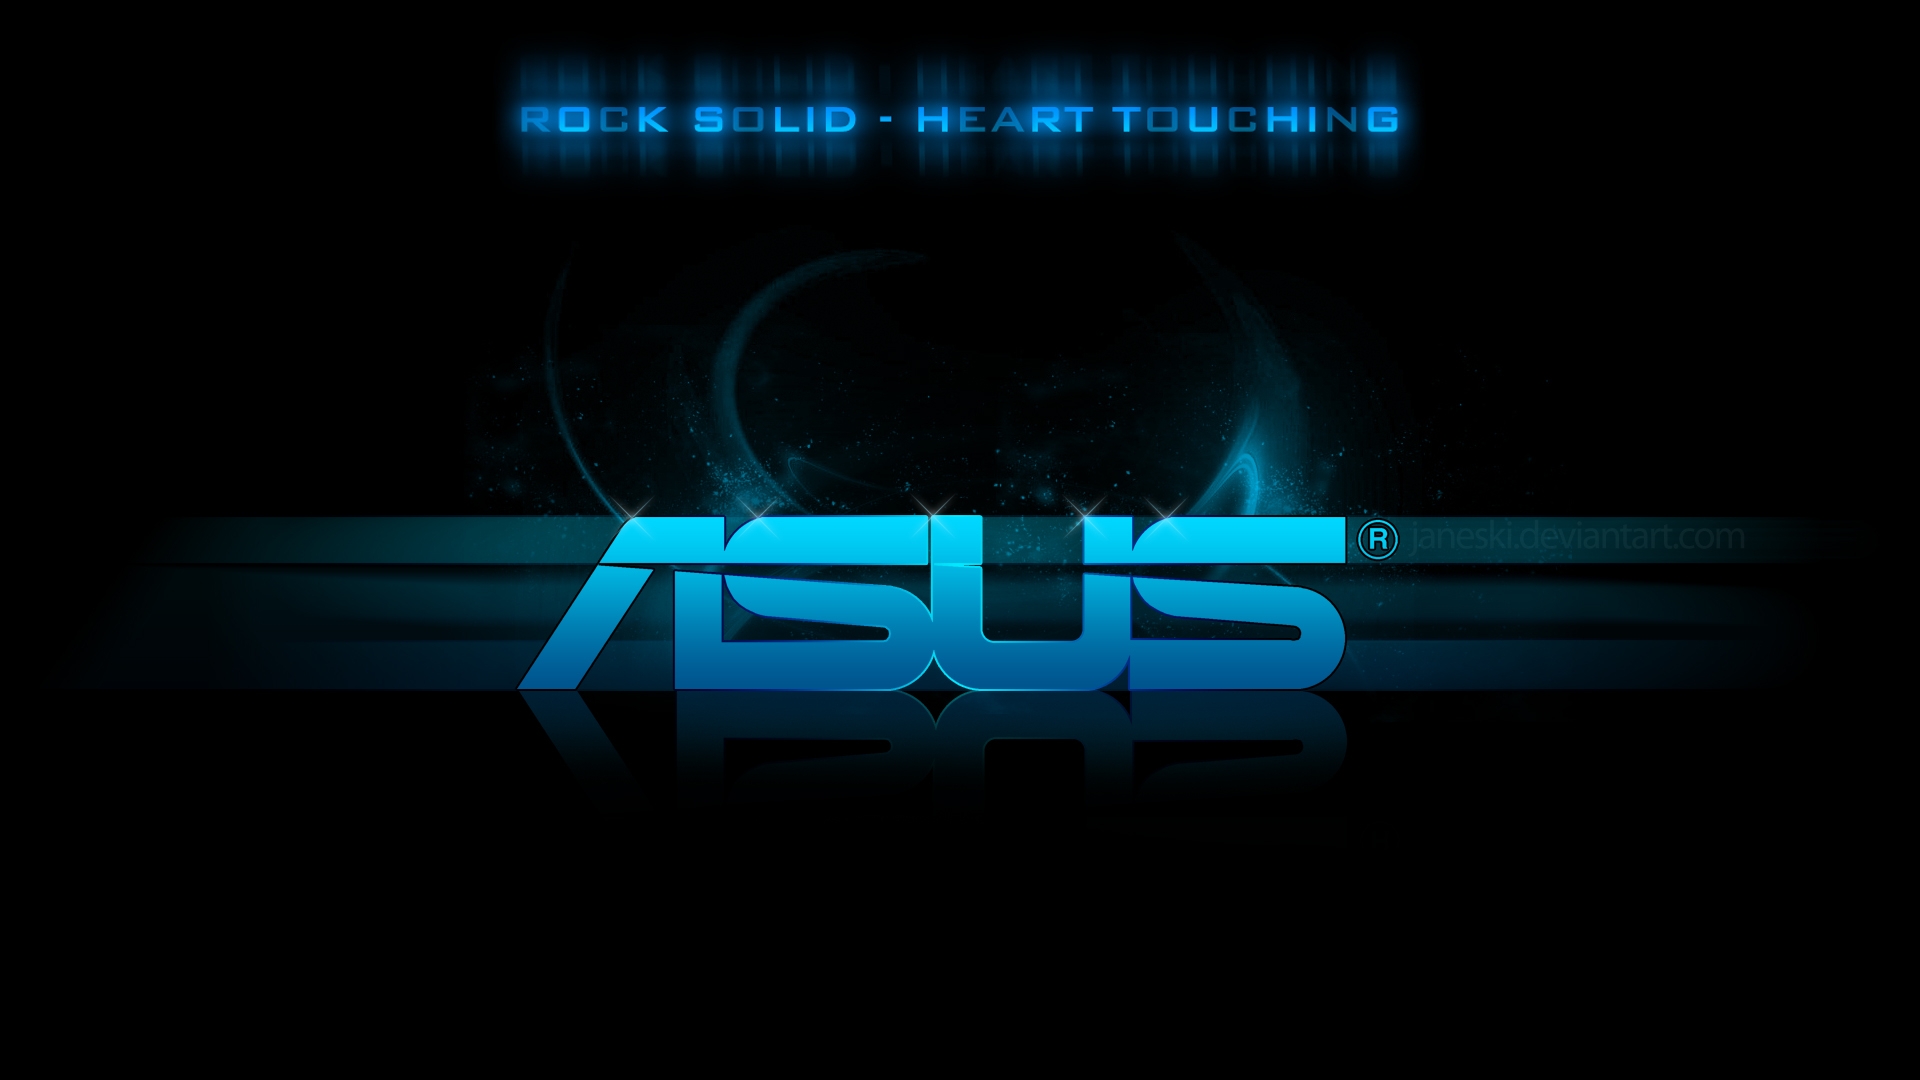 Wallpaper, black, text, logo, graphic design, neon sign, ASUS, midnight, darkness, graphics, computer wallpaper, font, product, electric blue 1920x1080